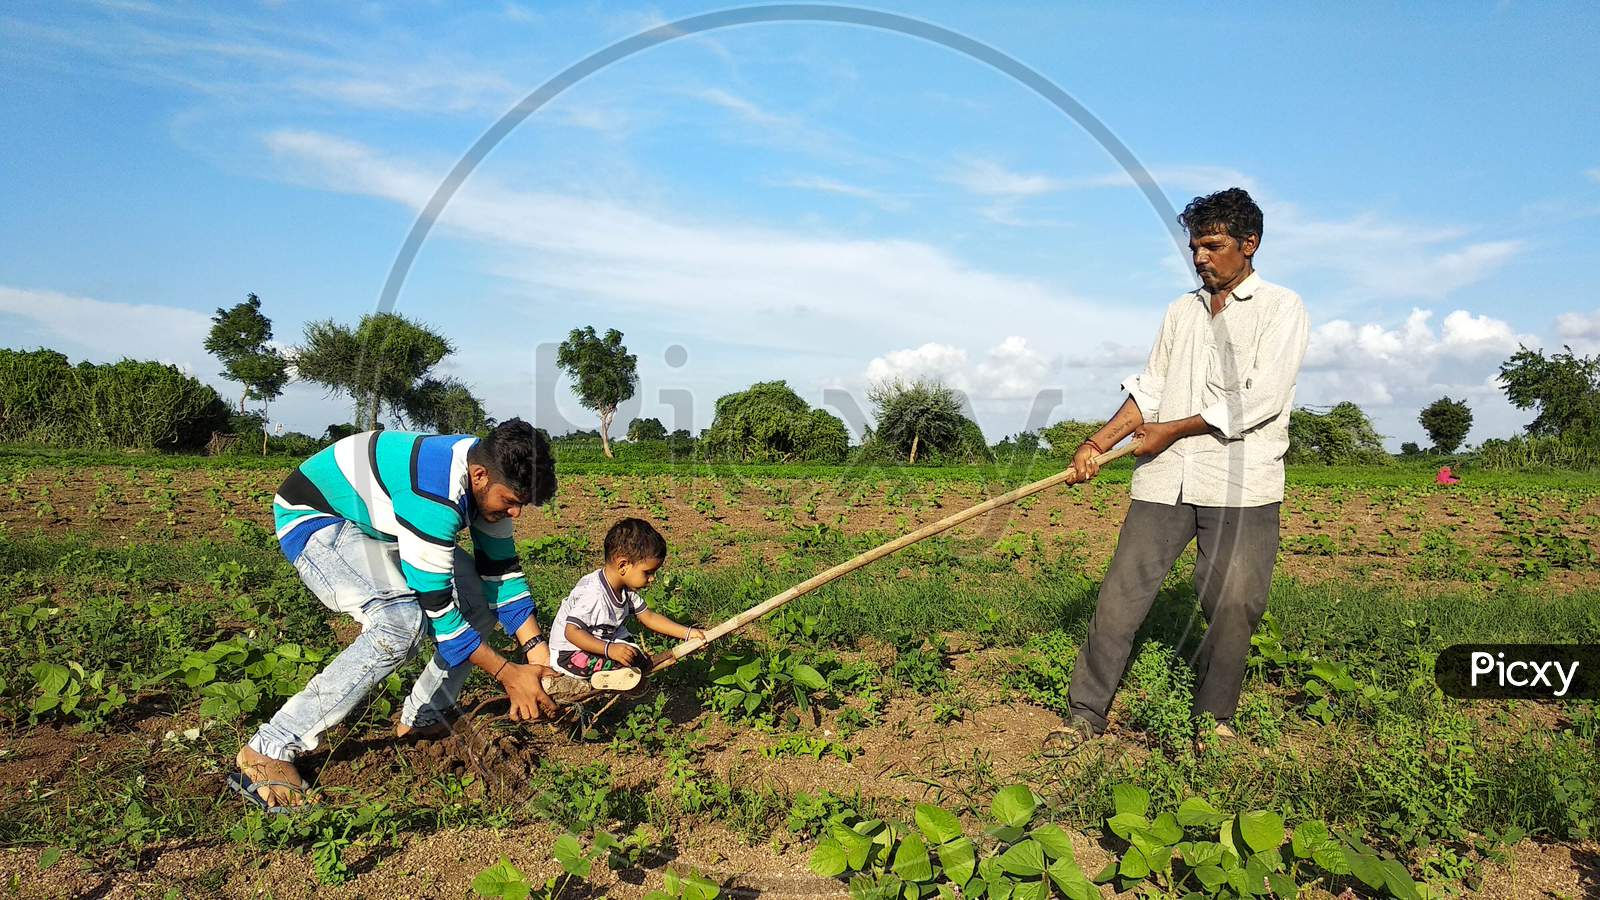 17 july 2020 india: A young Indian child is having fun on a farm with his grandfather and uncle